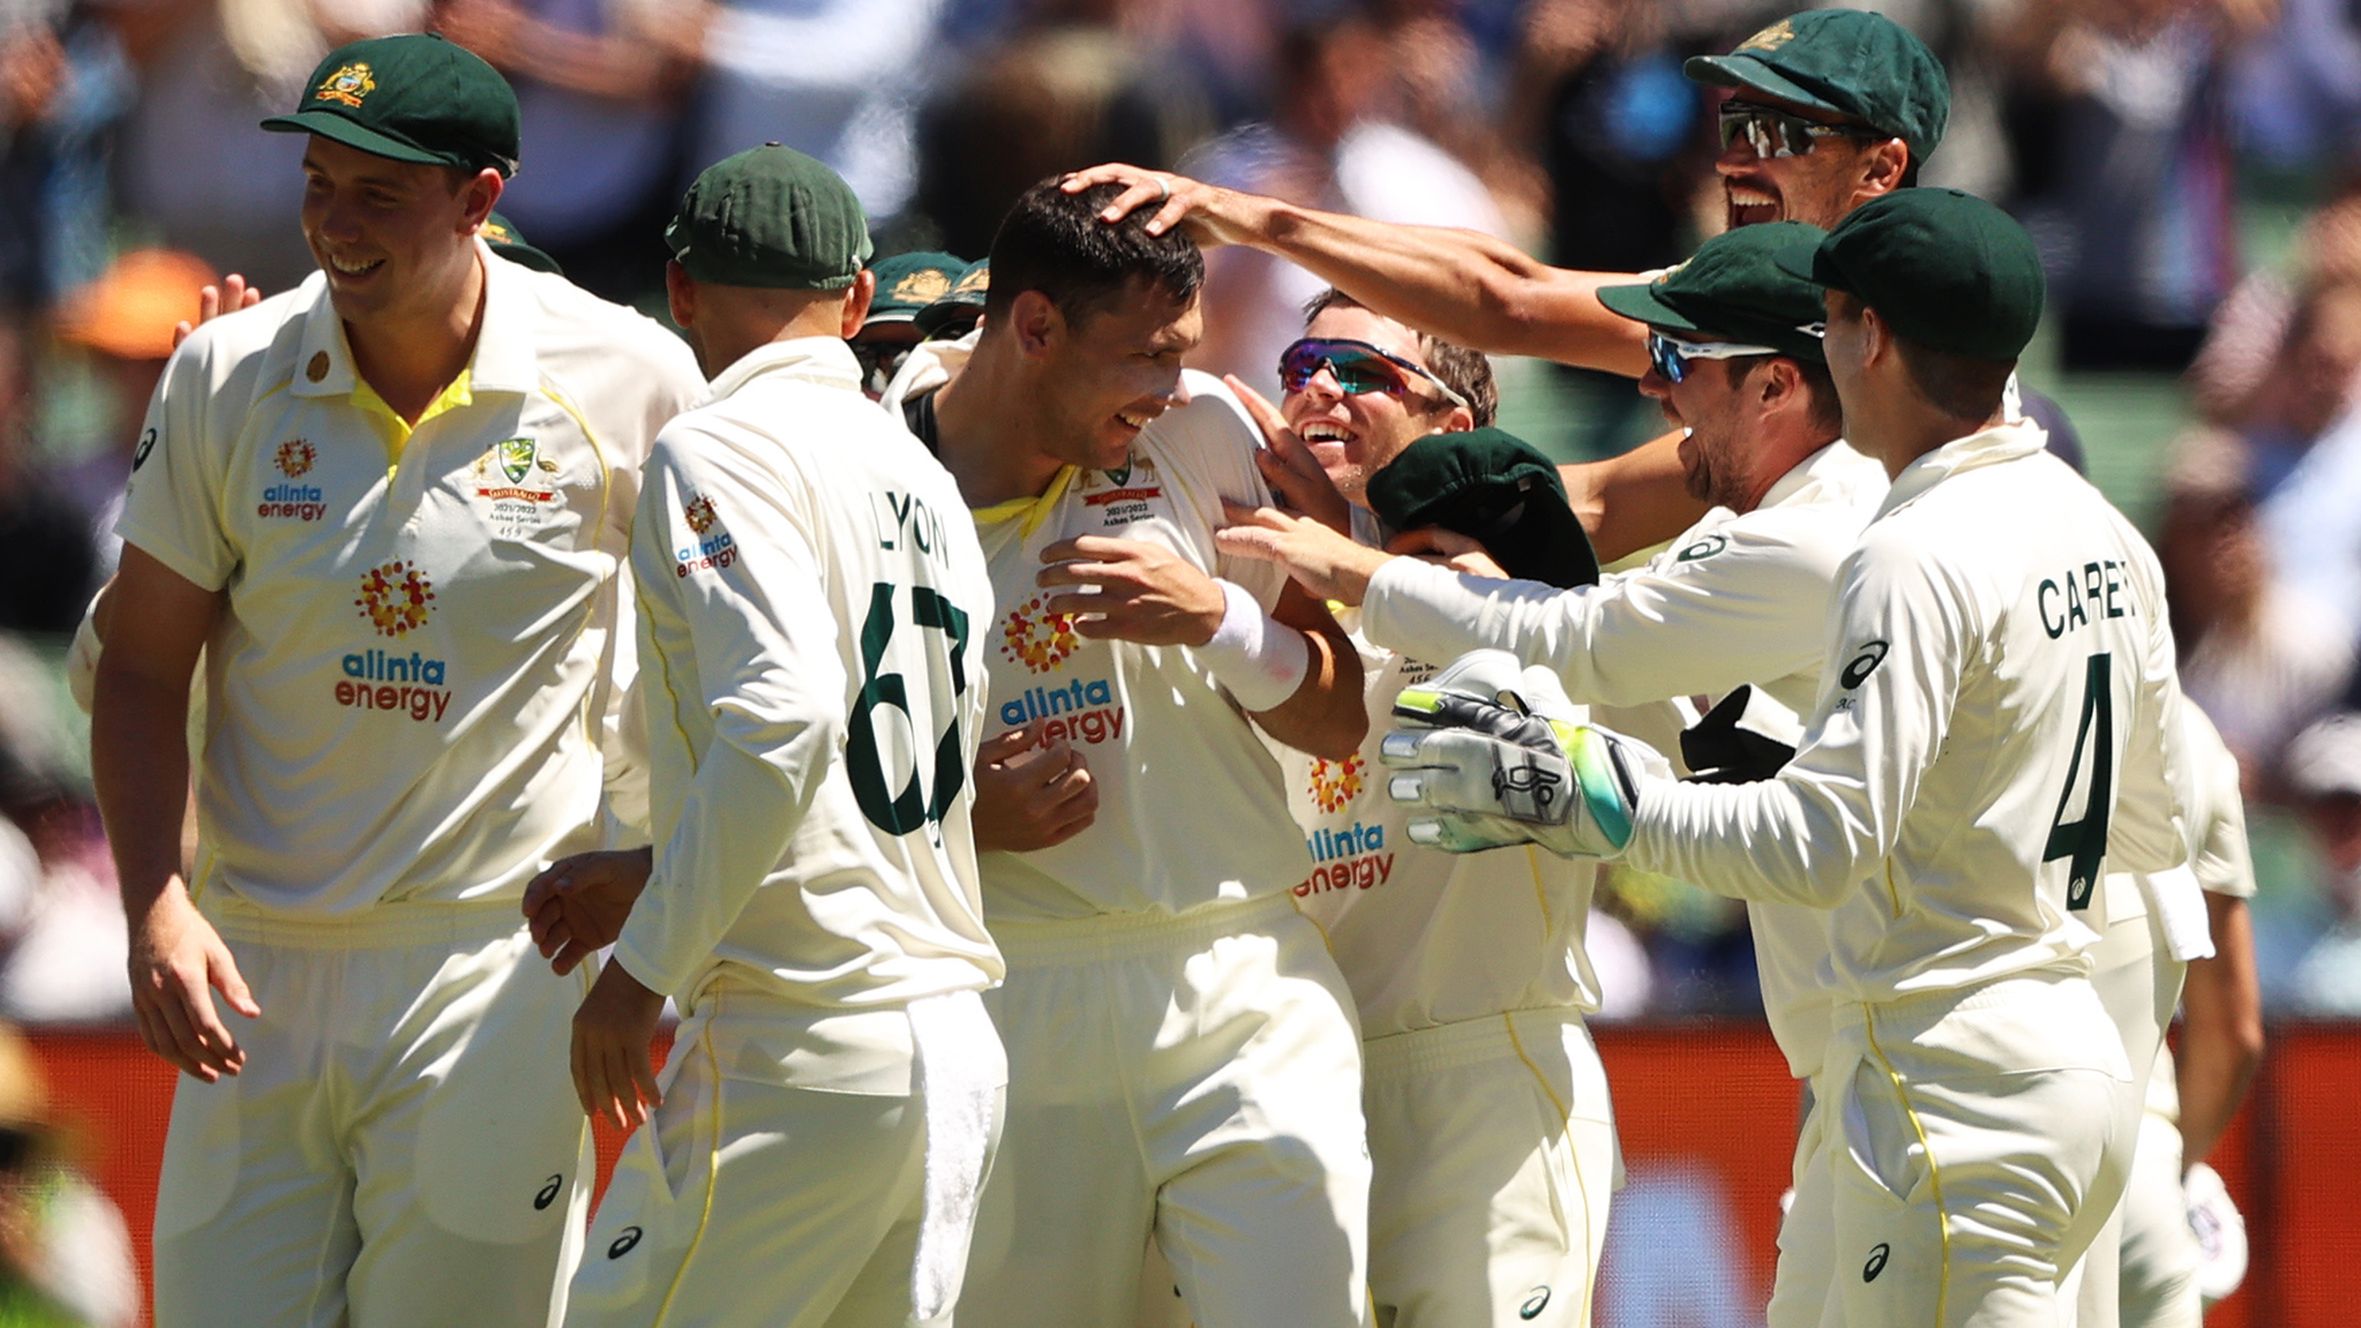 Australia retain the Ashes by belting England and taking 3-0 series lead, Scott Boland makes beautiful history